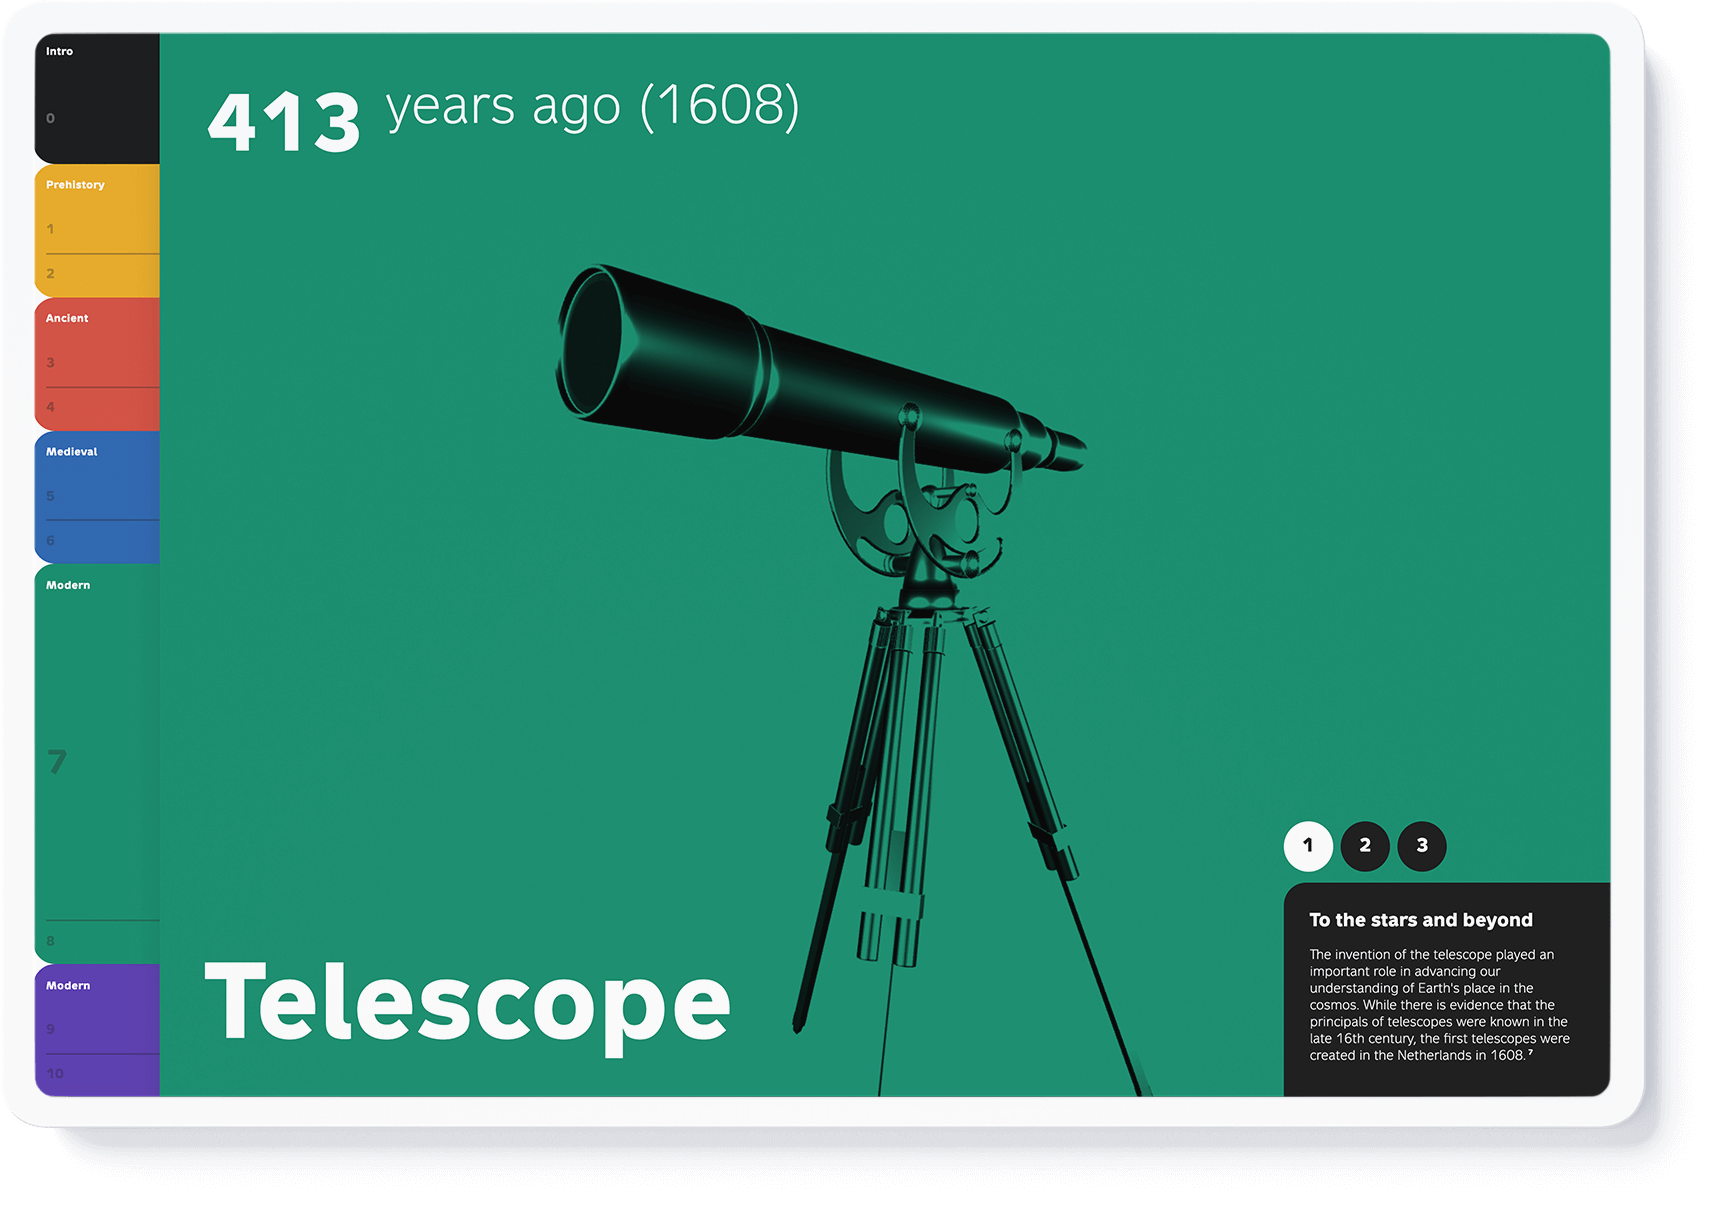 Interactive 3D model of a modern telescope on green ground (design by Nahuel Gerth)